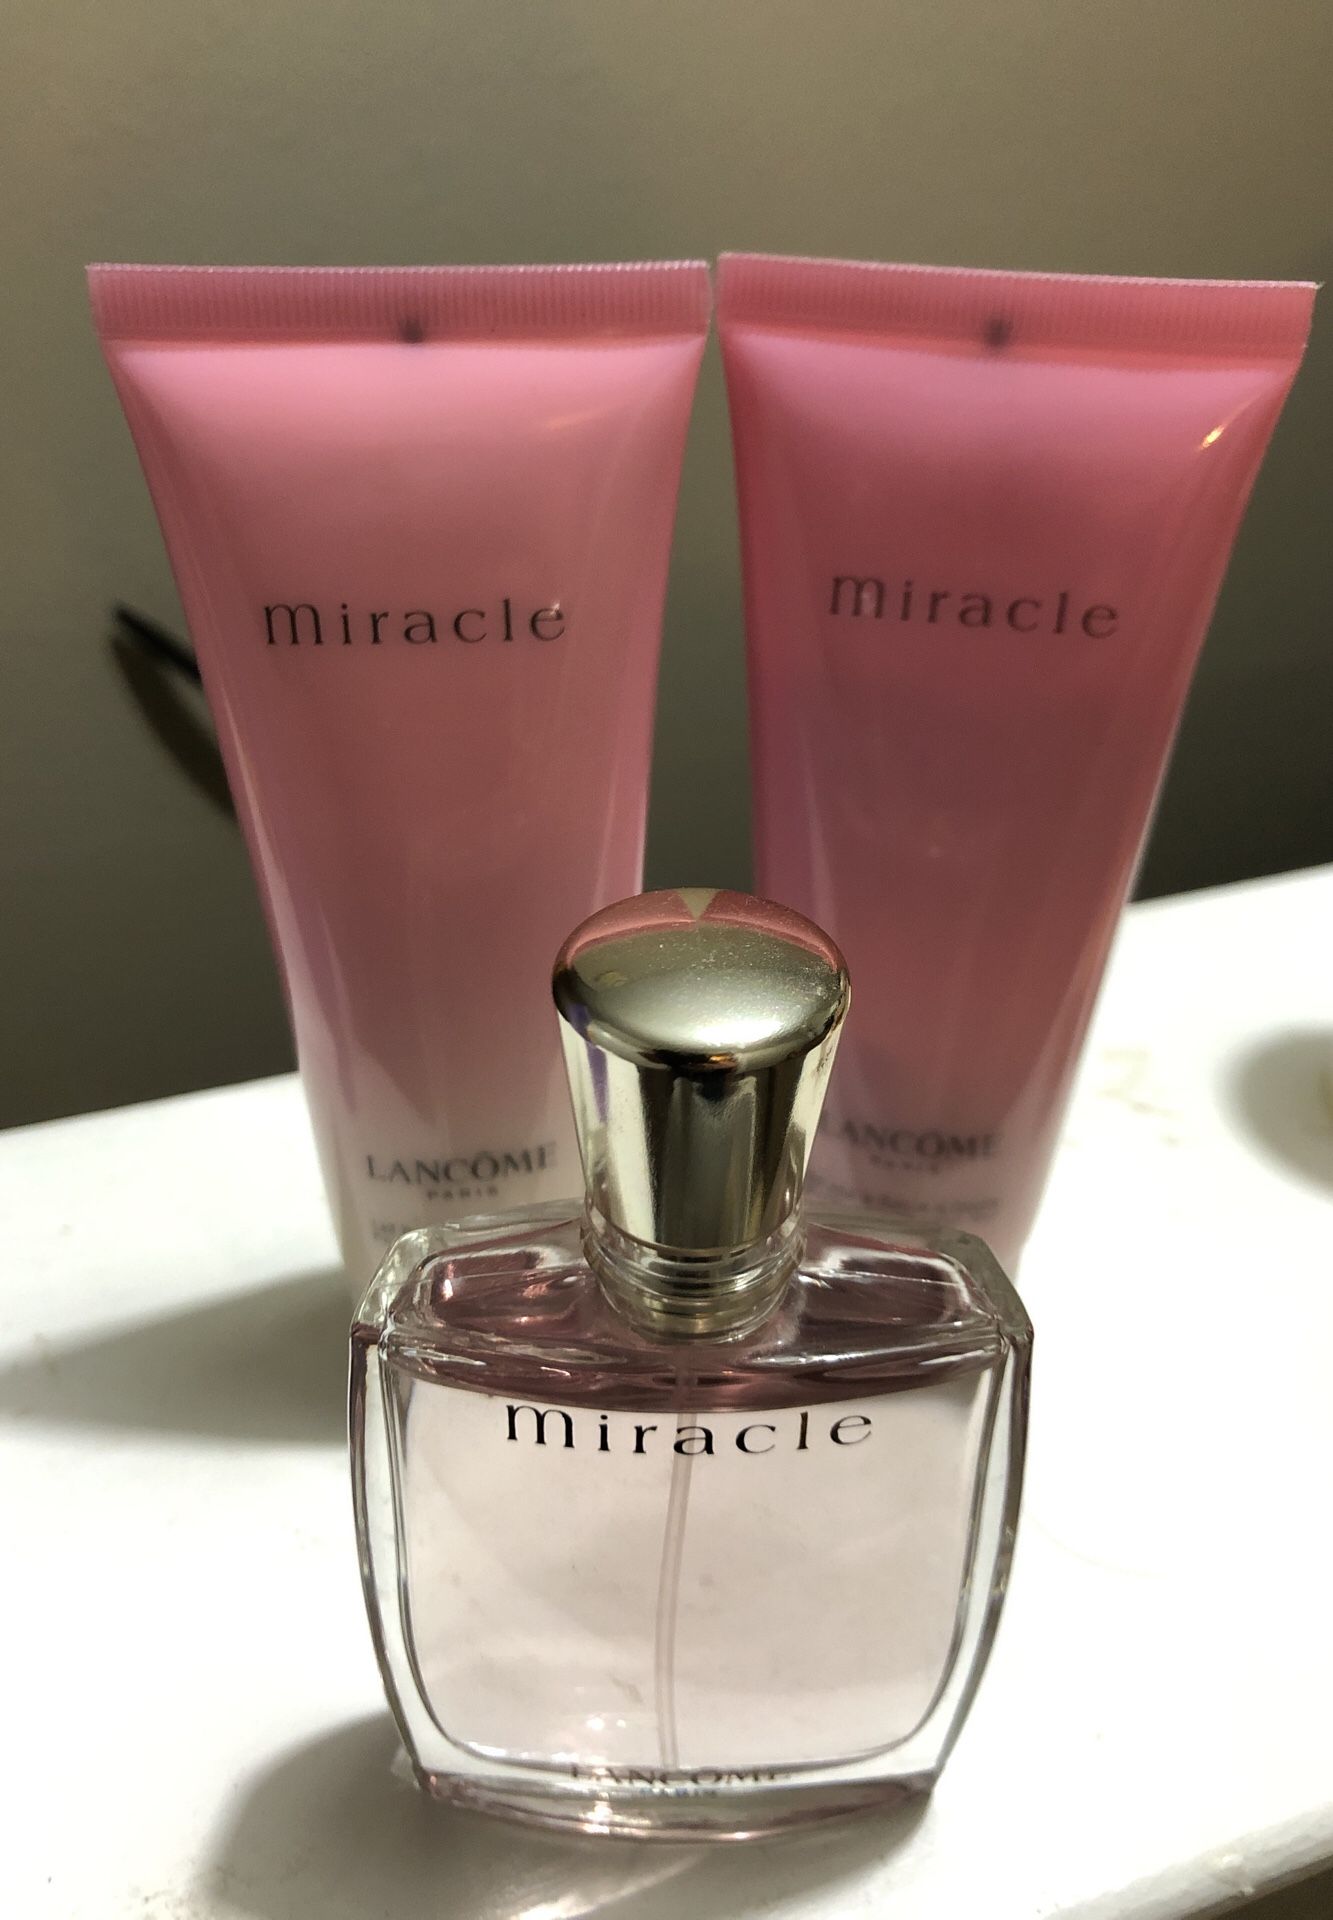 Lancôme Paris Miracle perfume and 2 lotions